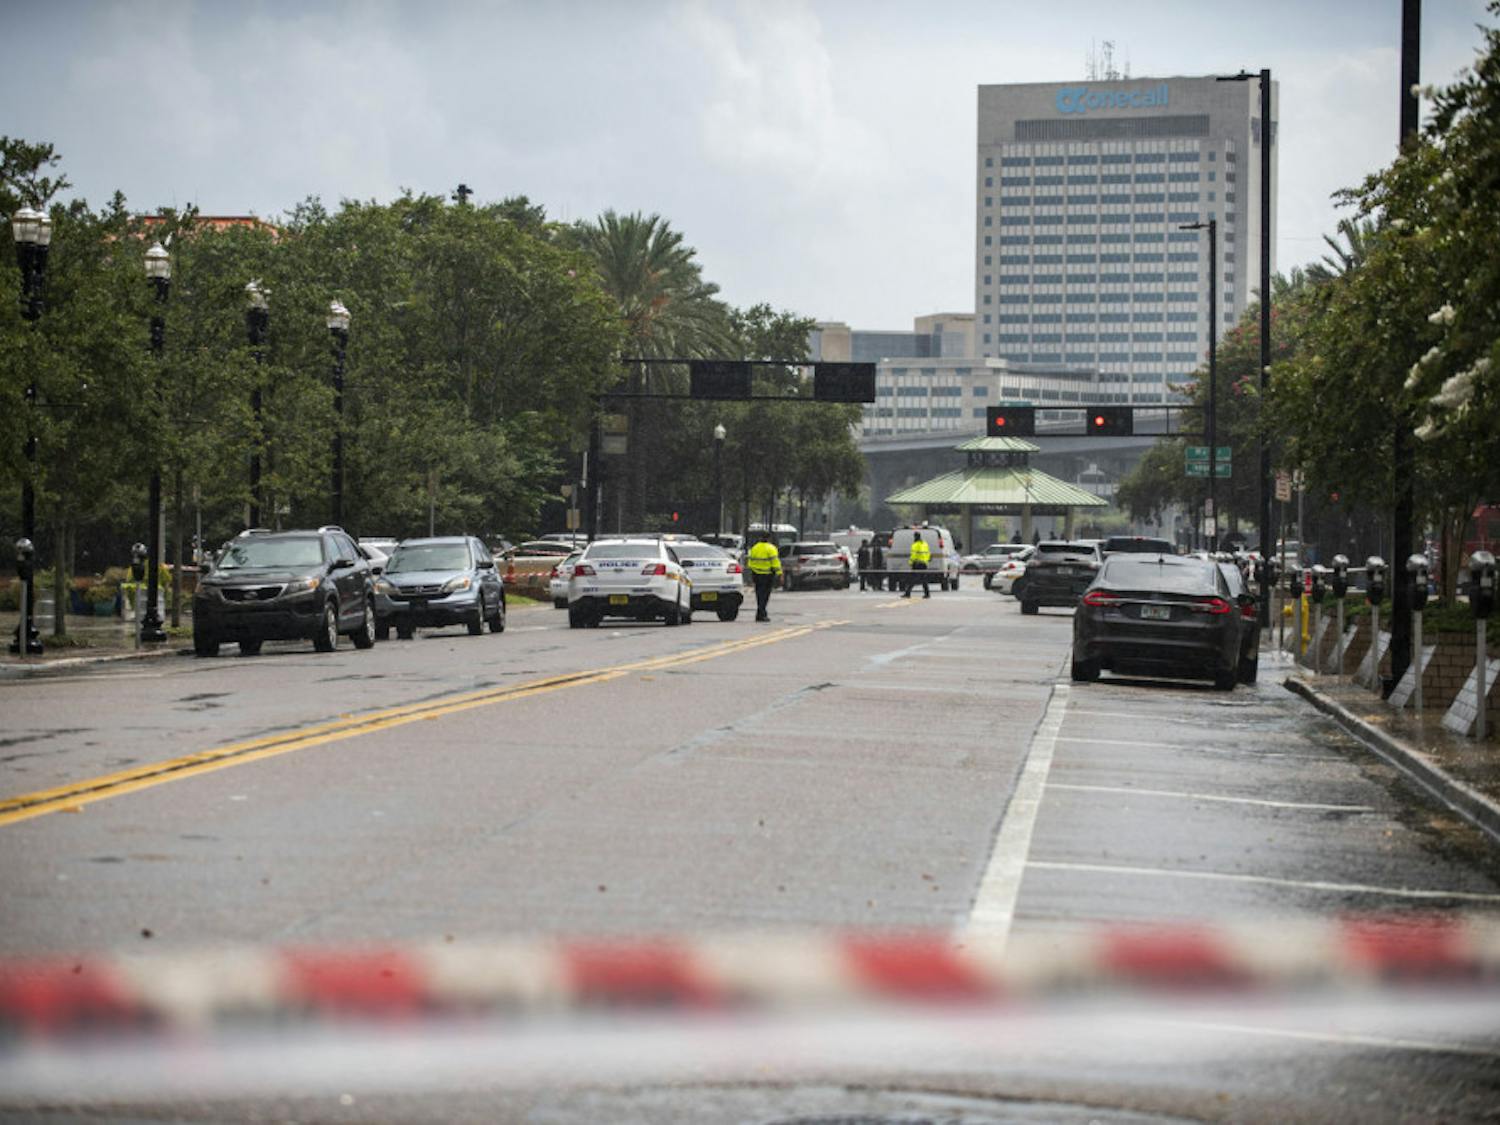 Police barricade a street near the Jacksonville Landing in Jacksonville, Fla., Sunday, Aug. 26, 2018. Florida authorities are reporting multiple fatalities after a mass shooting at the riverfront mall in Jacksonville that was hosting a video game tournament. (AP Photo/Laura Heald)